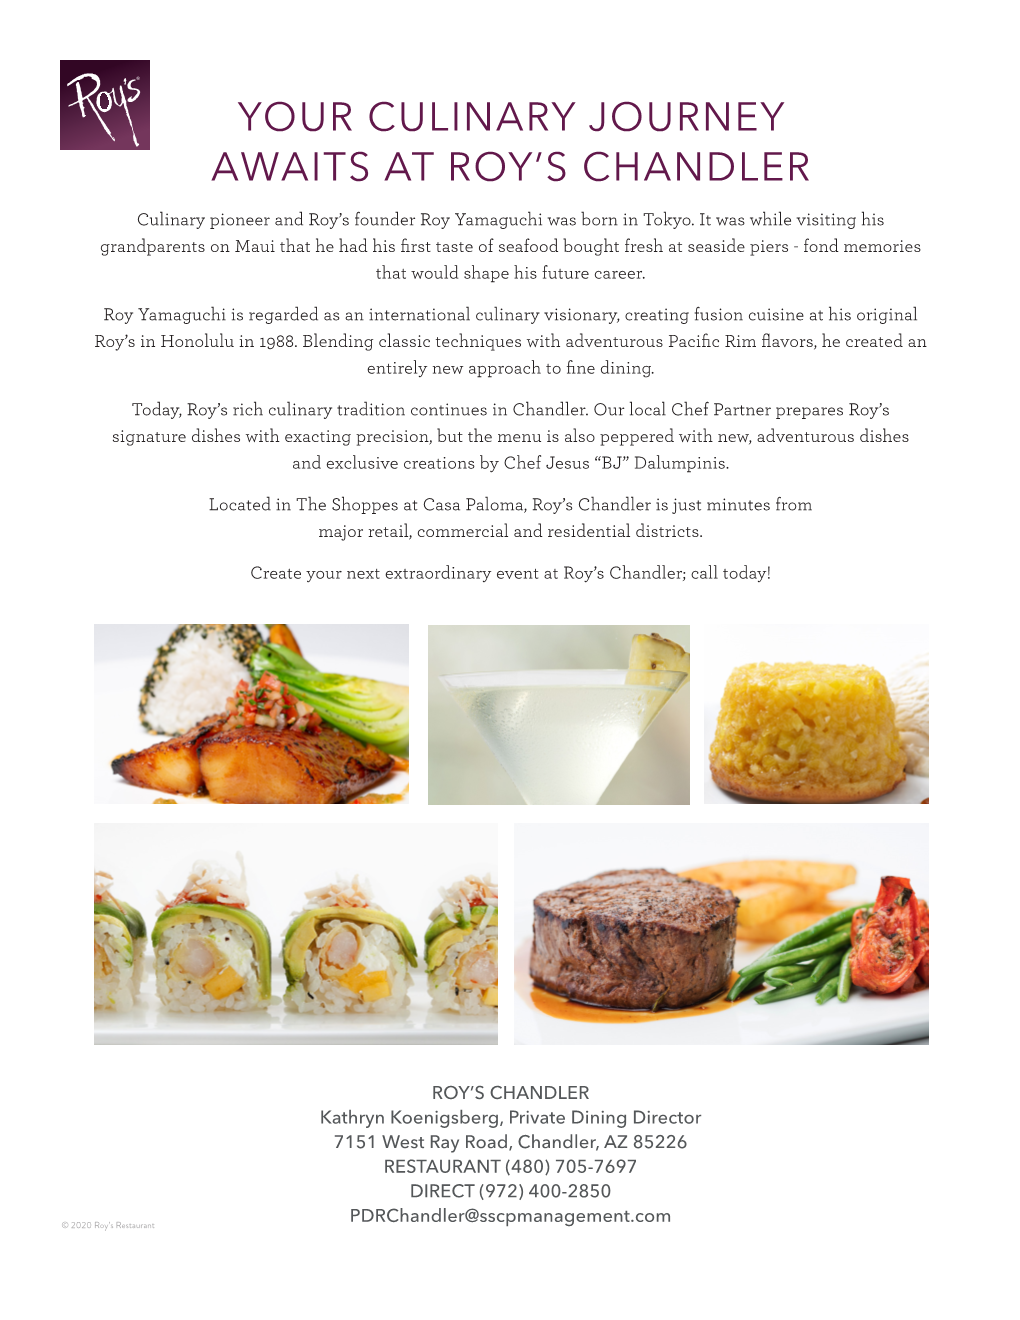 Your Culinary Journey Awaits at Roy's Chandler